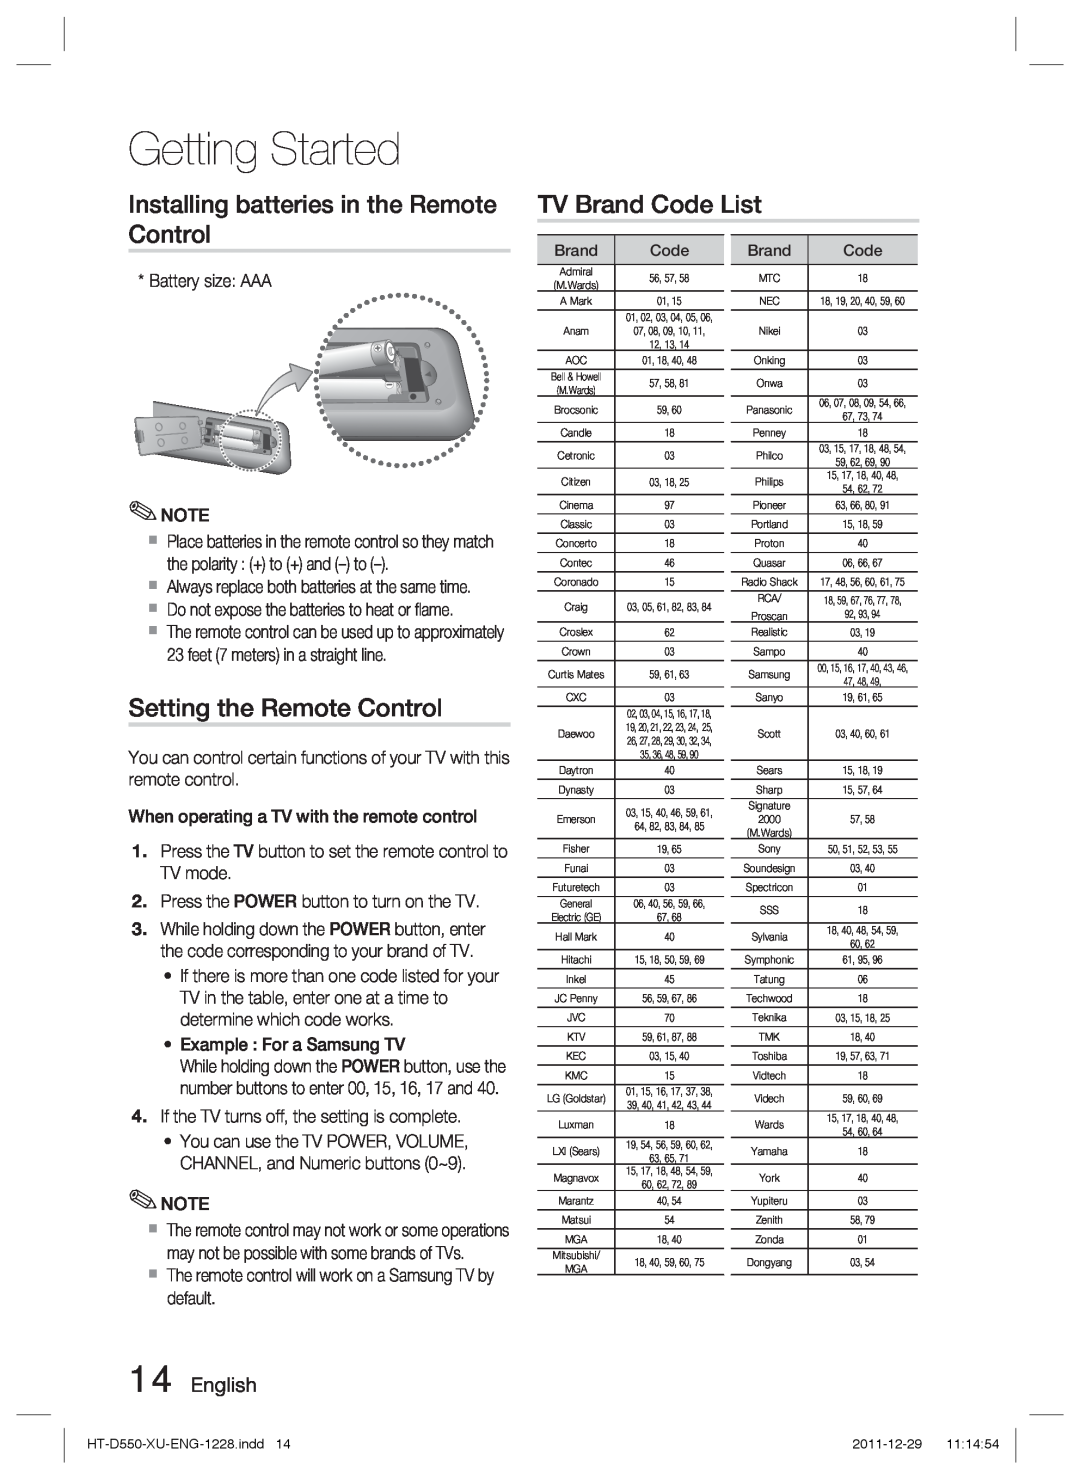 Samsung HT-D555/ZF Installing batteries in the Remote Control, TV Brand Code List, Setting the Remote Control, English 